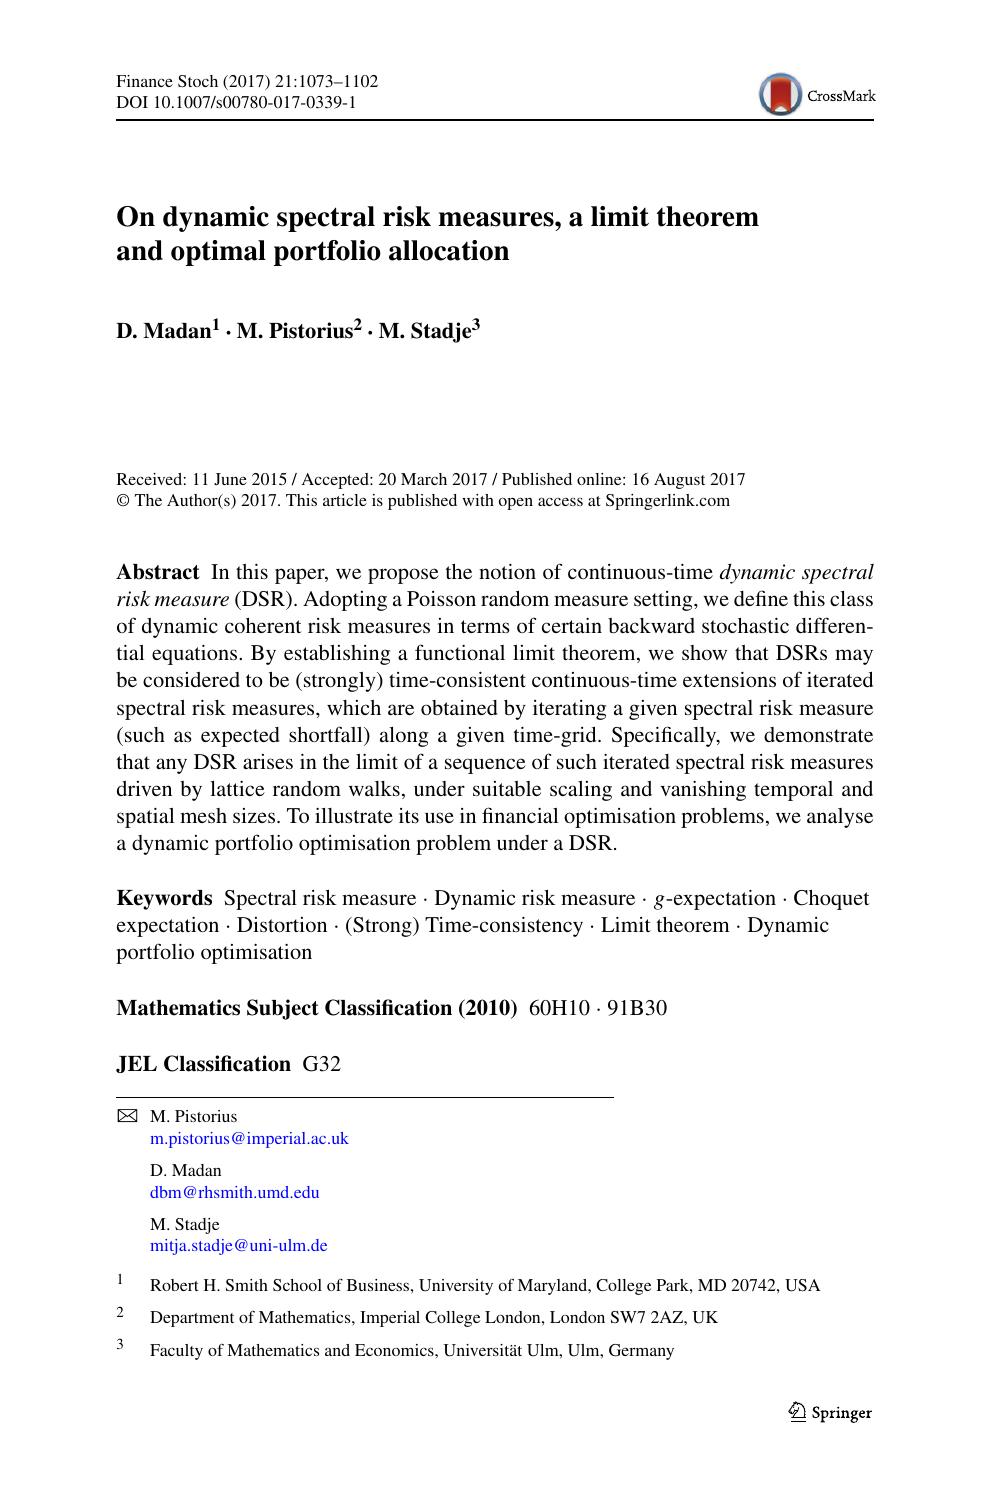 On Dynamic Spectral Risk Measures A Limit Theorem And Optimal Portfolio Allocation Topic Of Research Paper In Mathematics Download Scholarly Article Pdf And Read For Free On Cyberleninka Open Science Hub